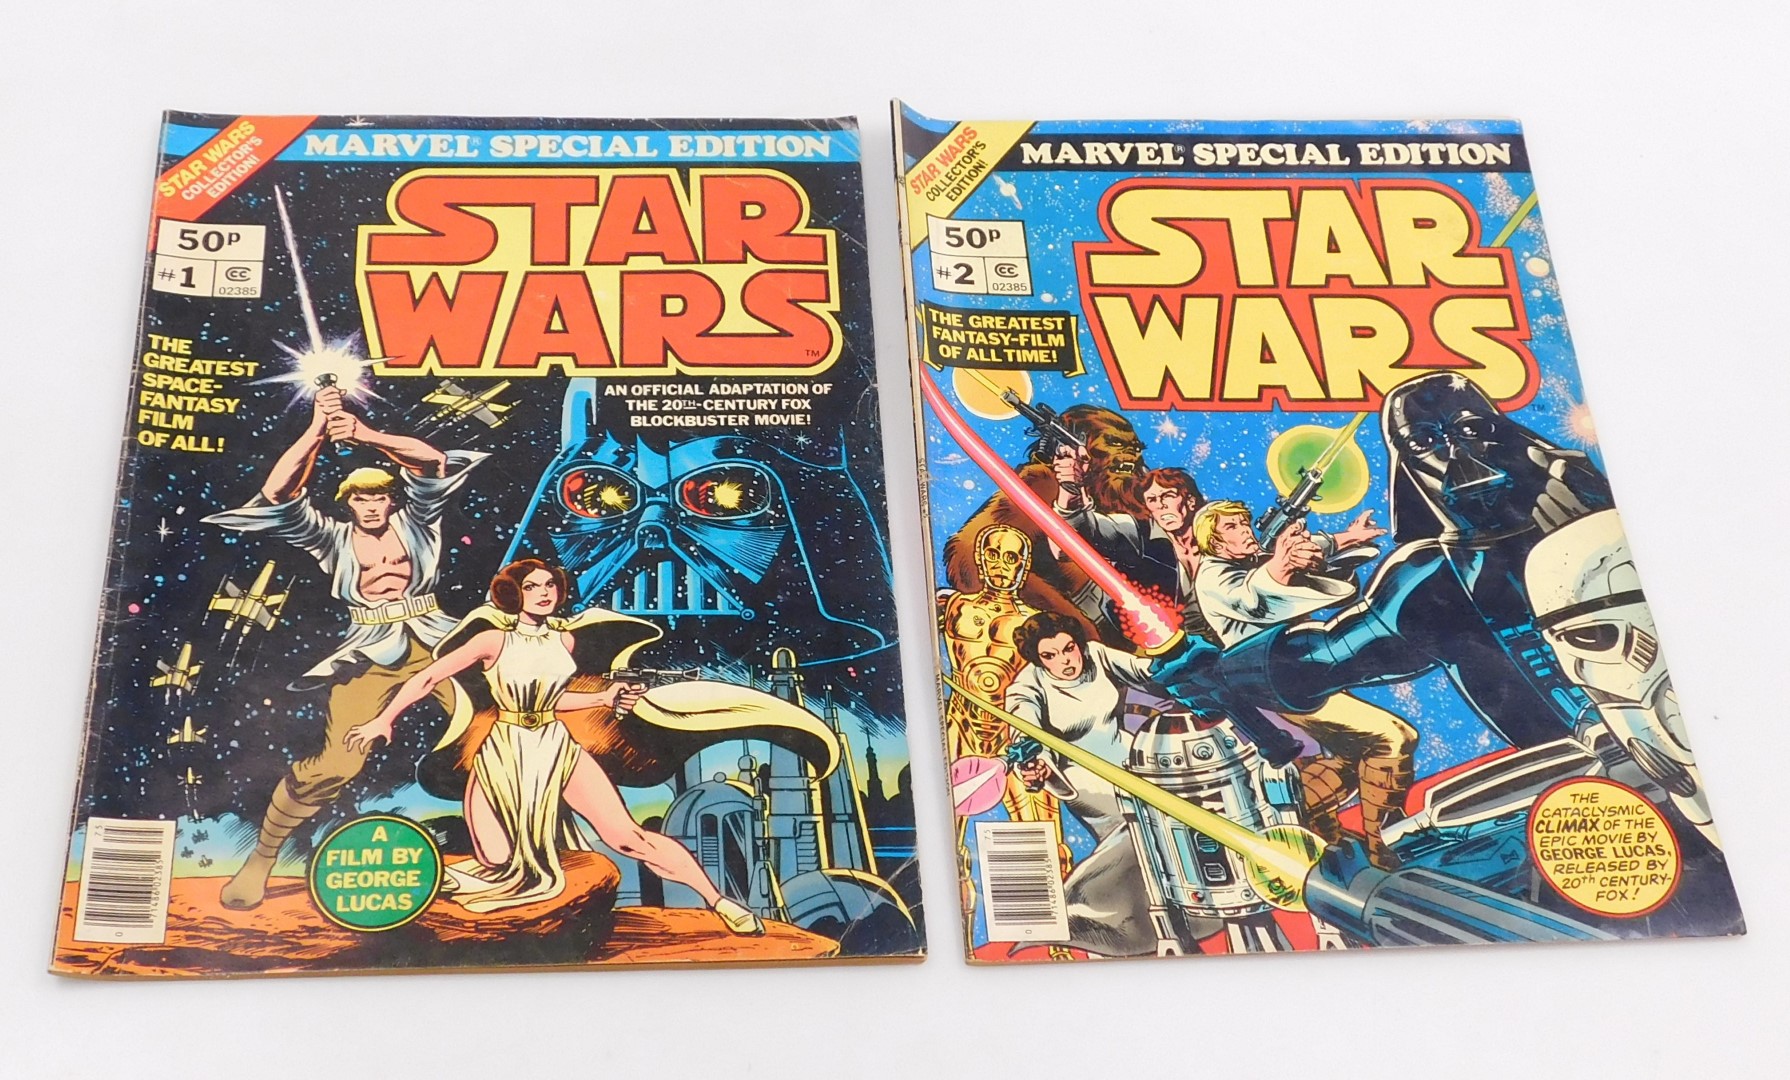 Marvel comics. Two editions of Marvel Special Edition (Star Wars), Issues 1,2. (Bronze Age). - Image 2 of 2